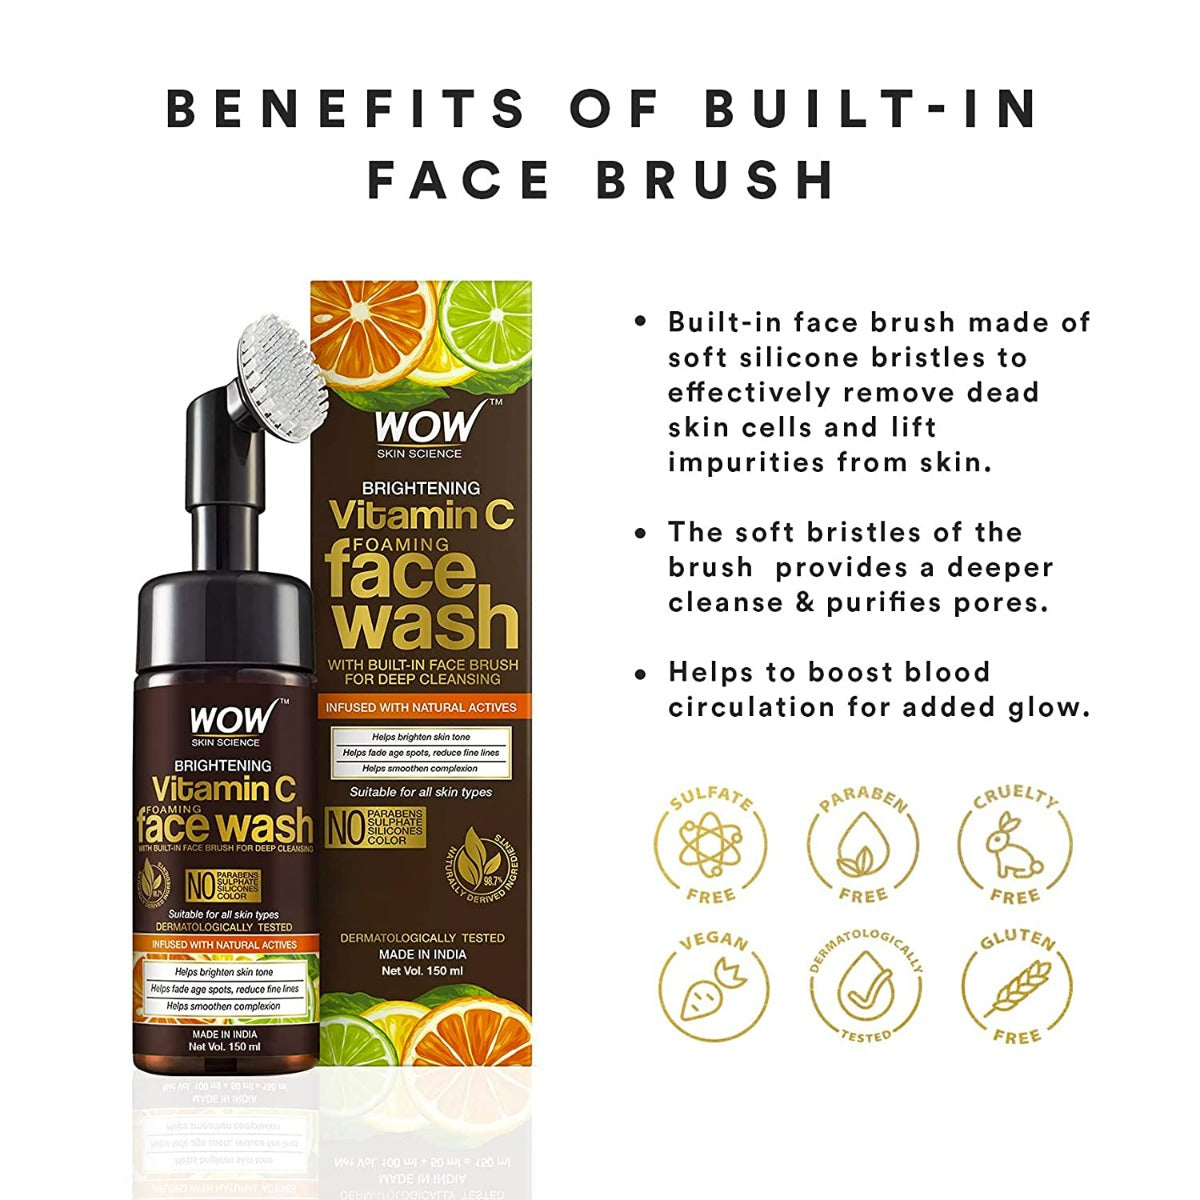 Wow Skin Science Vitamin C Face Wash with Brush (150ml)